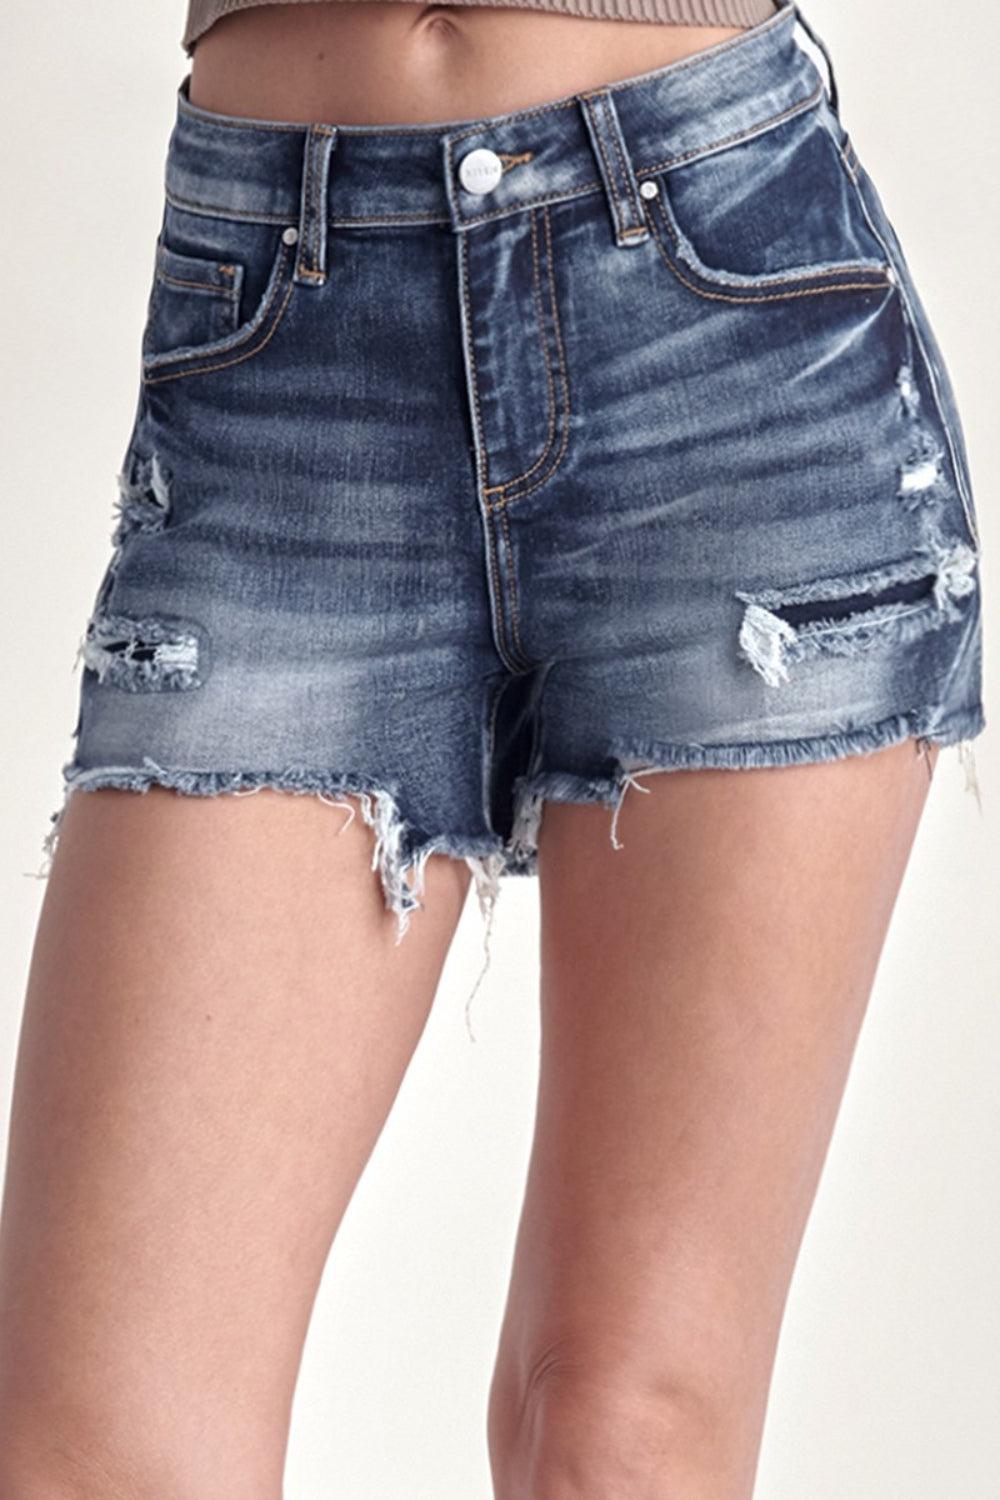 a woman is wearing a pair of shorts